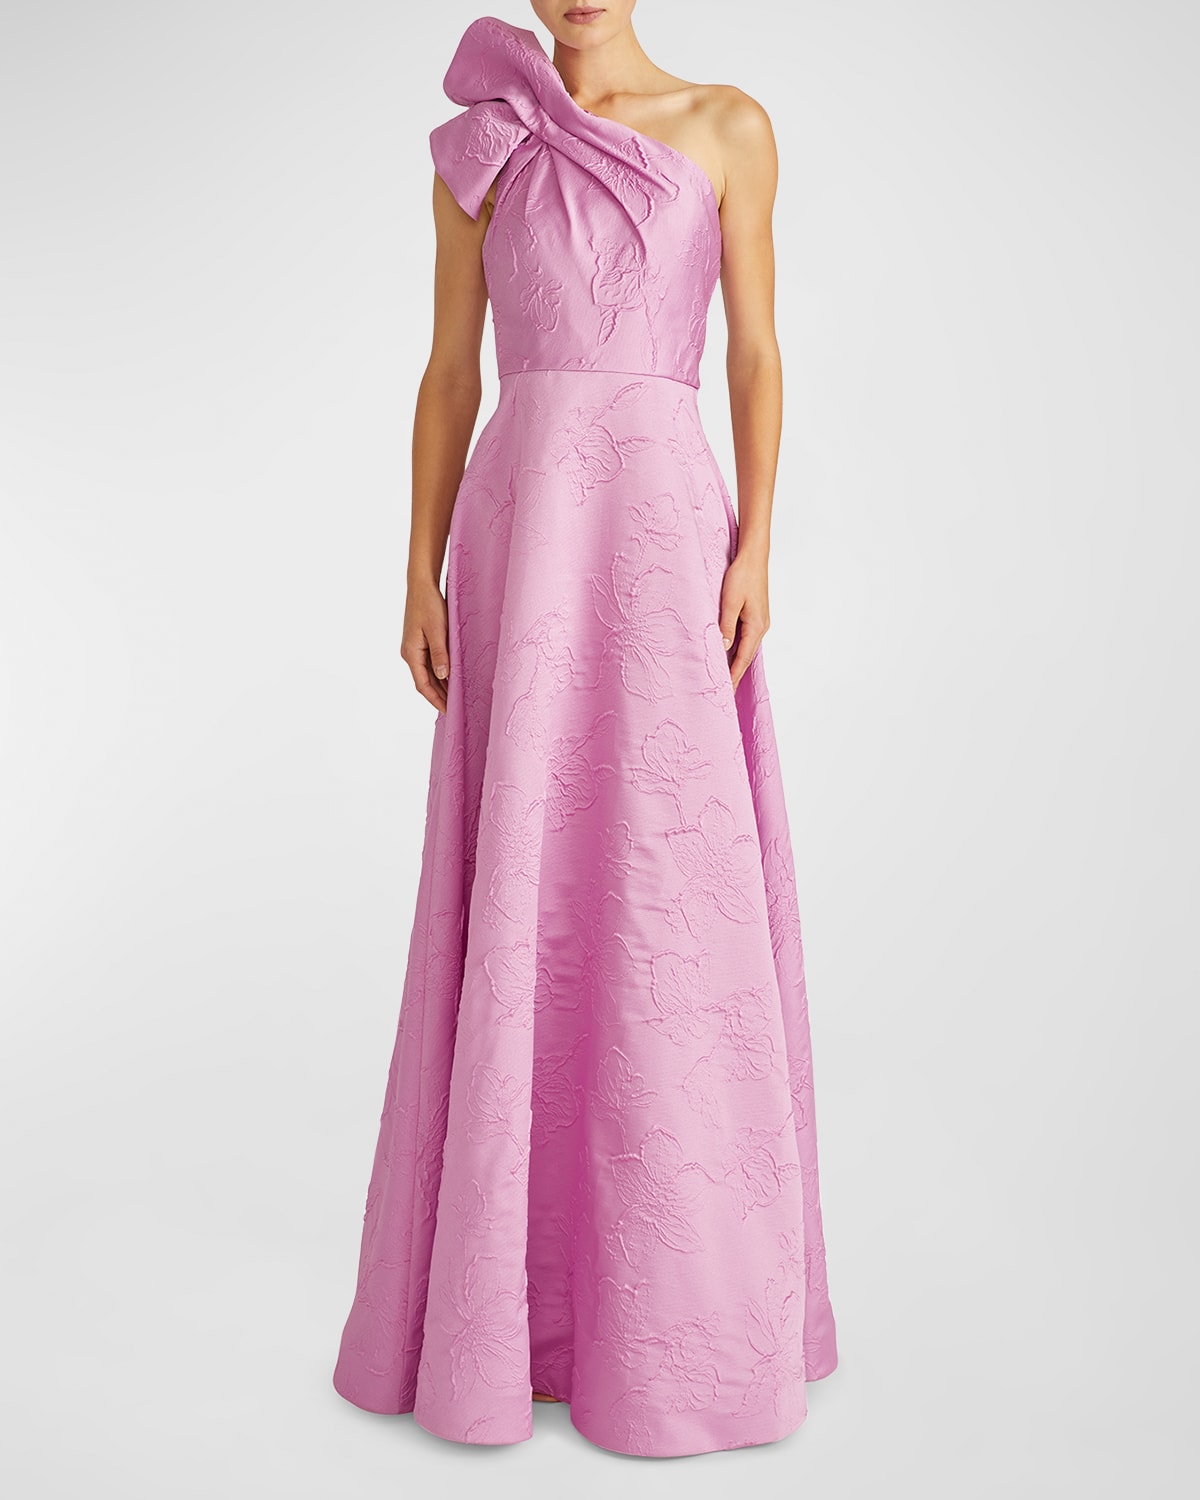 ml Monique Lhuillier Amira One-shoulder Floral Jacquard Ruffle Gown In Soft Orchid